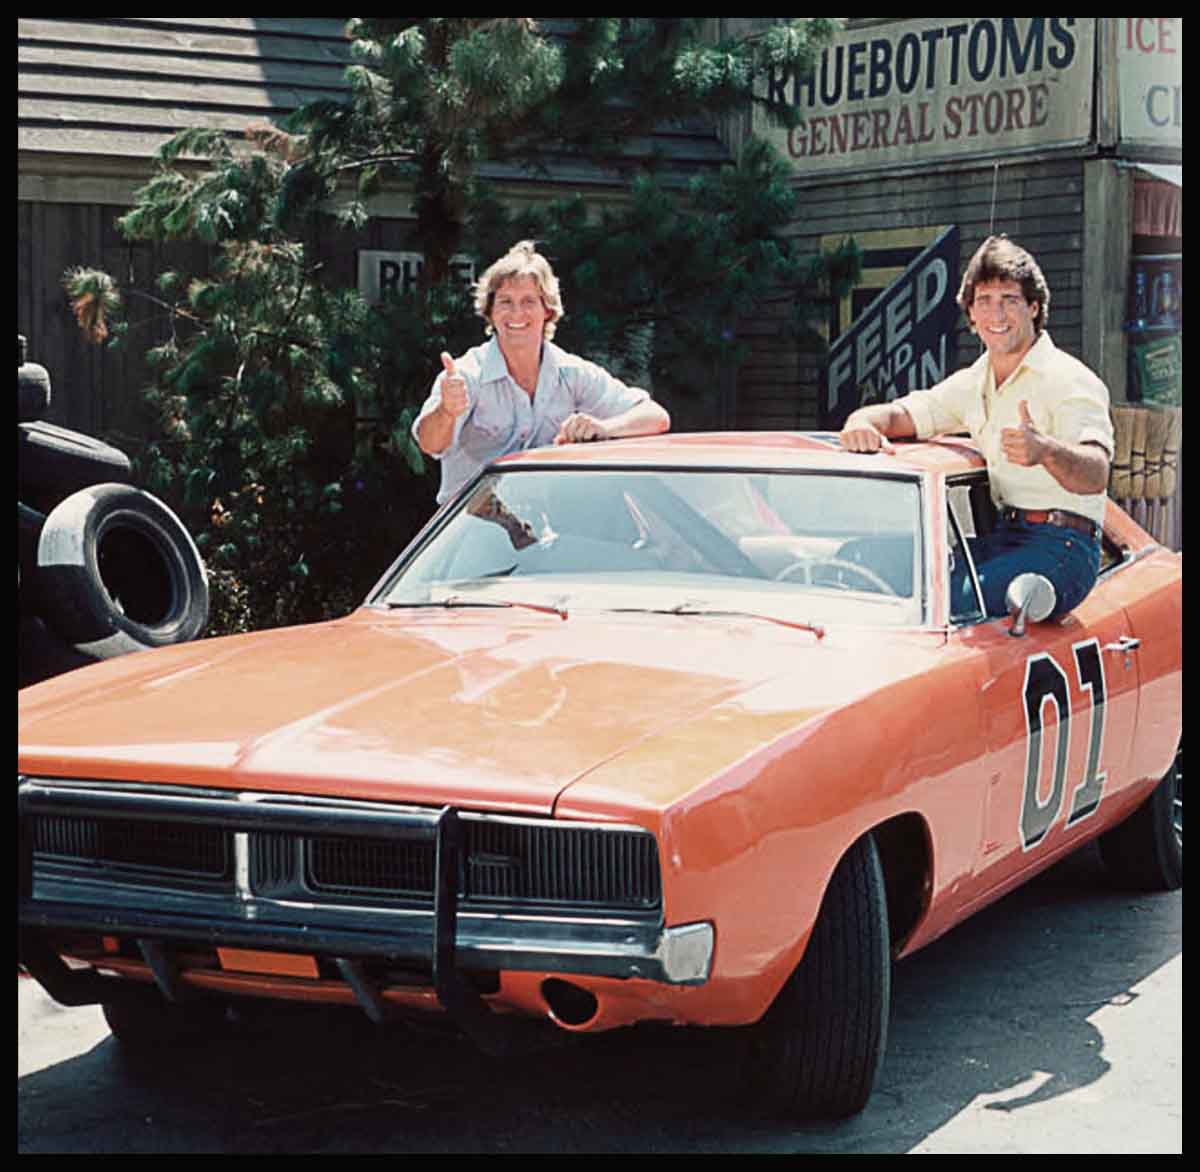 Why an artist smashed up 'The Dukes of Hazzard's' General Lee